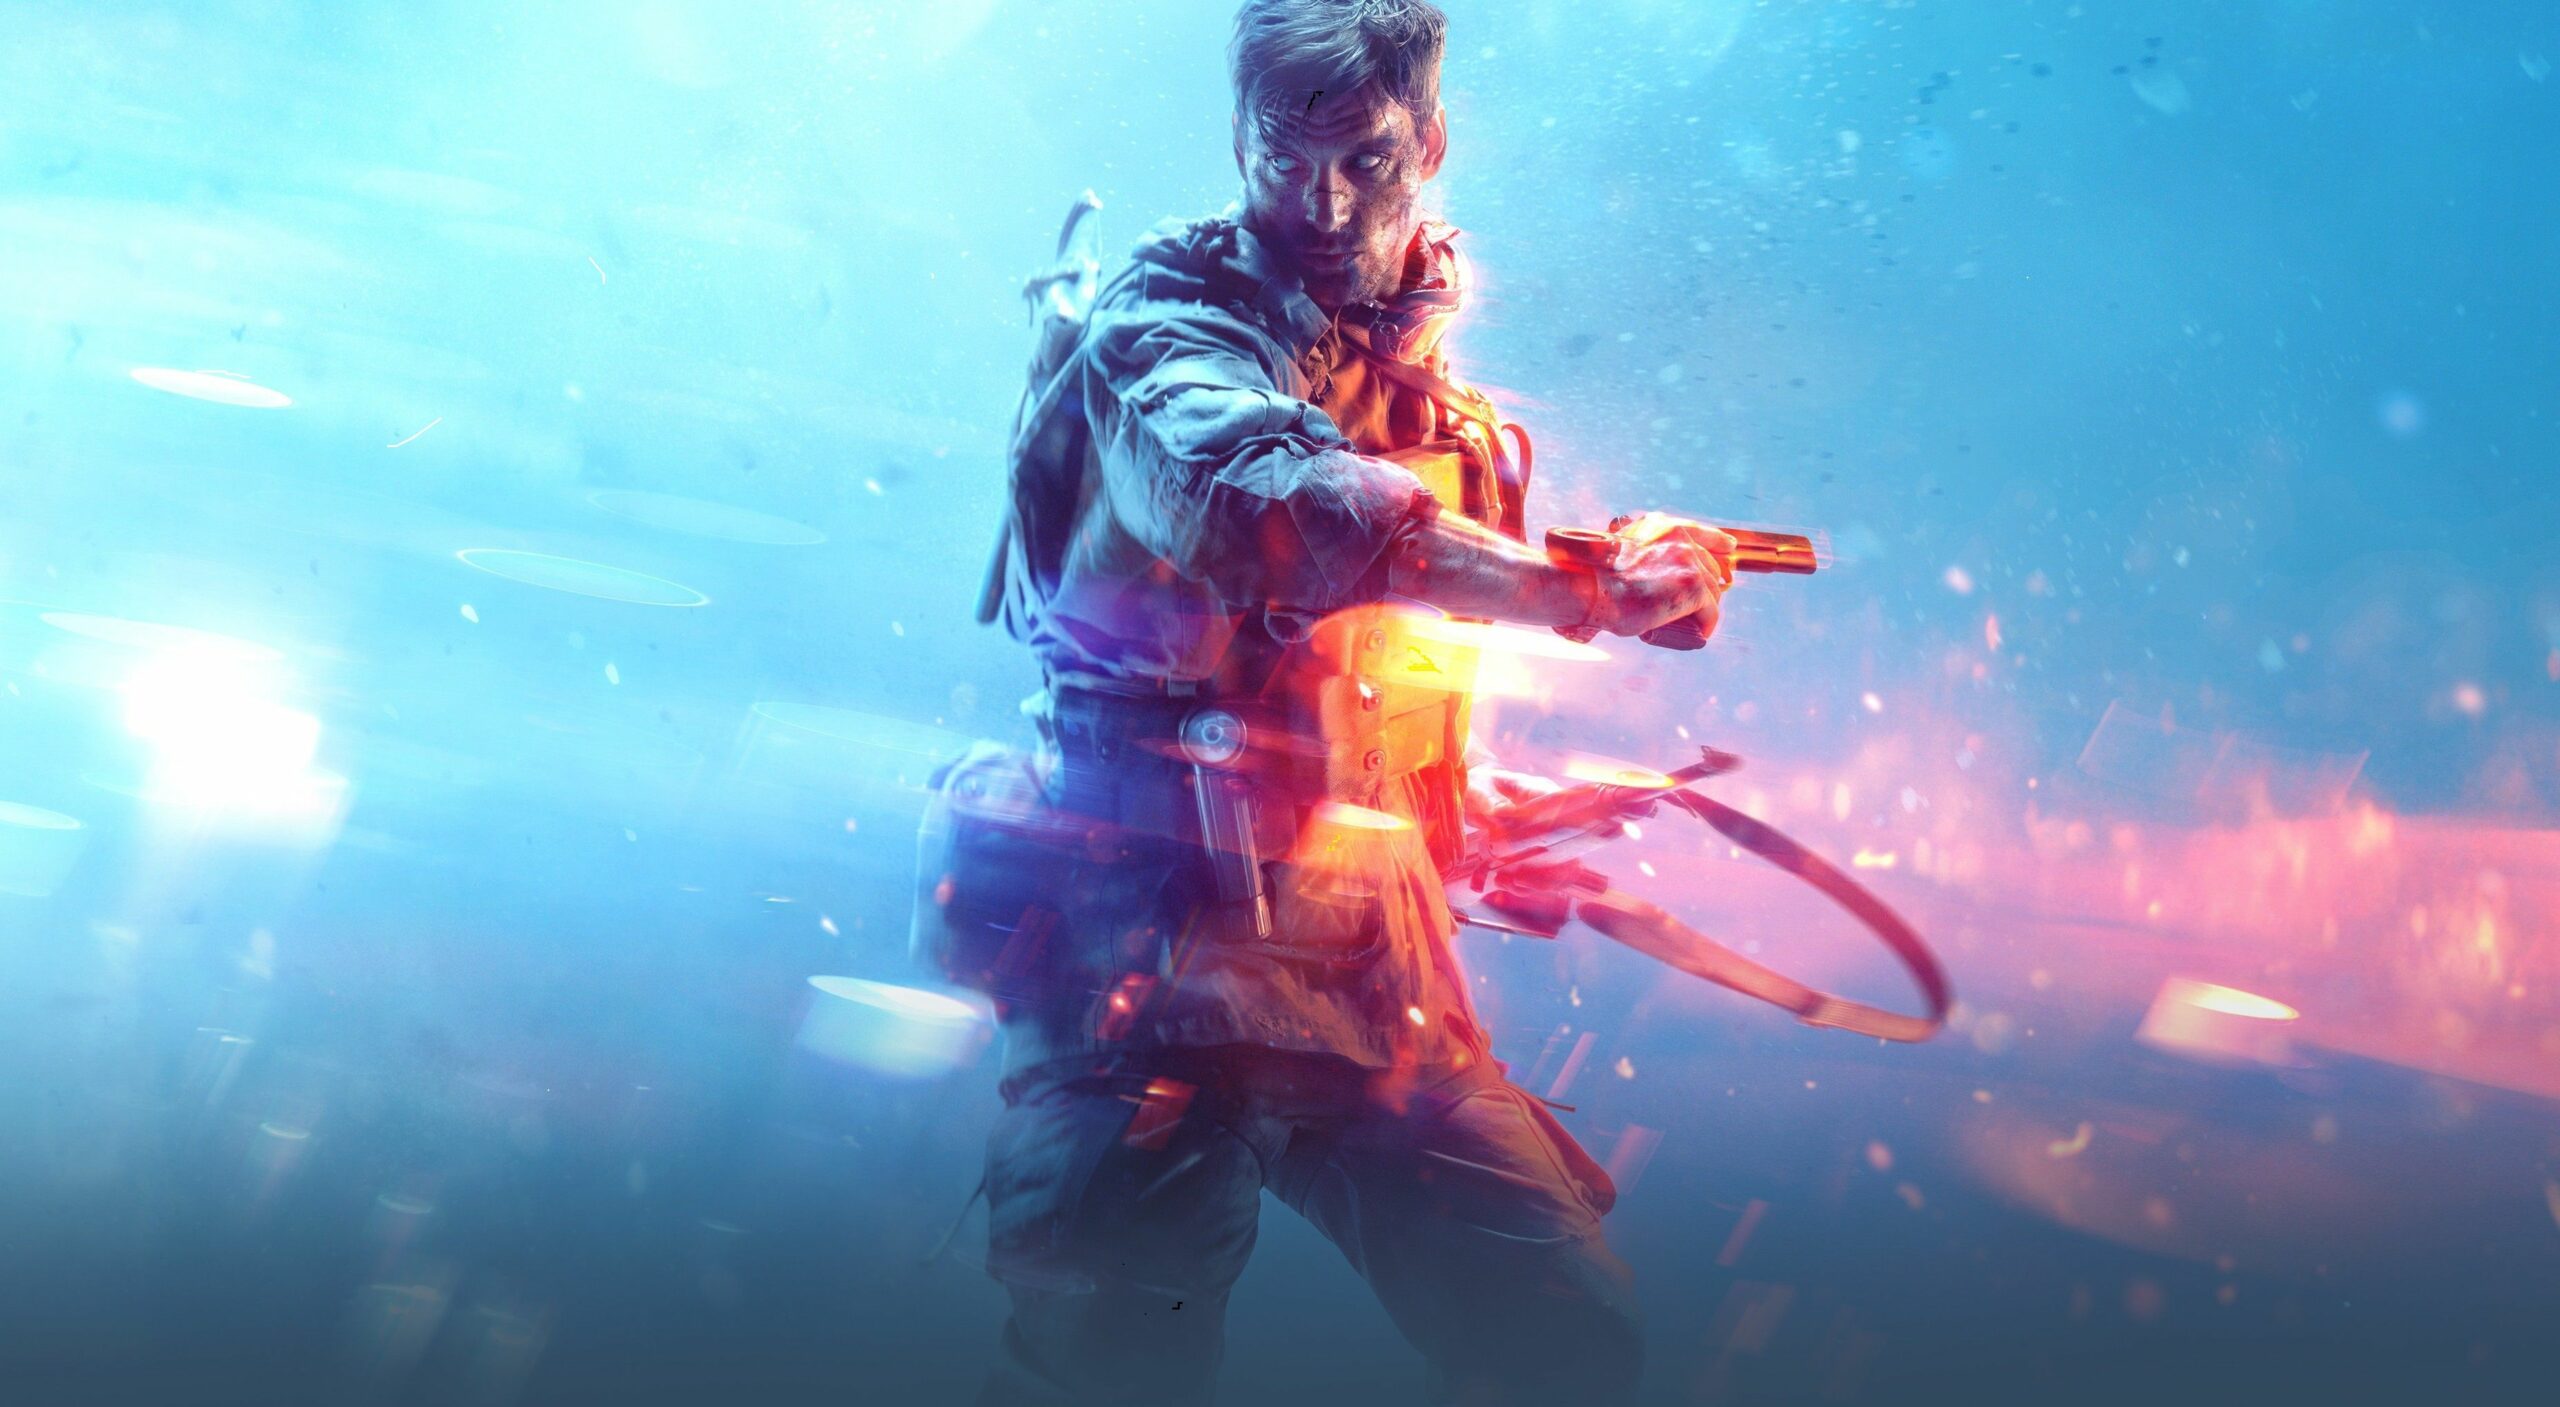 Battlefield 5 Official Pc Game Fast Download